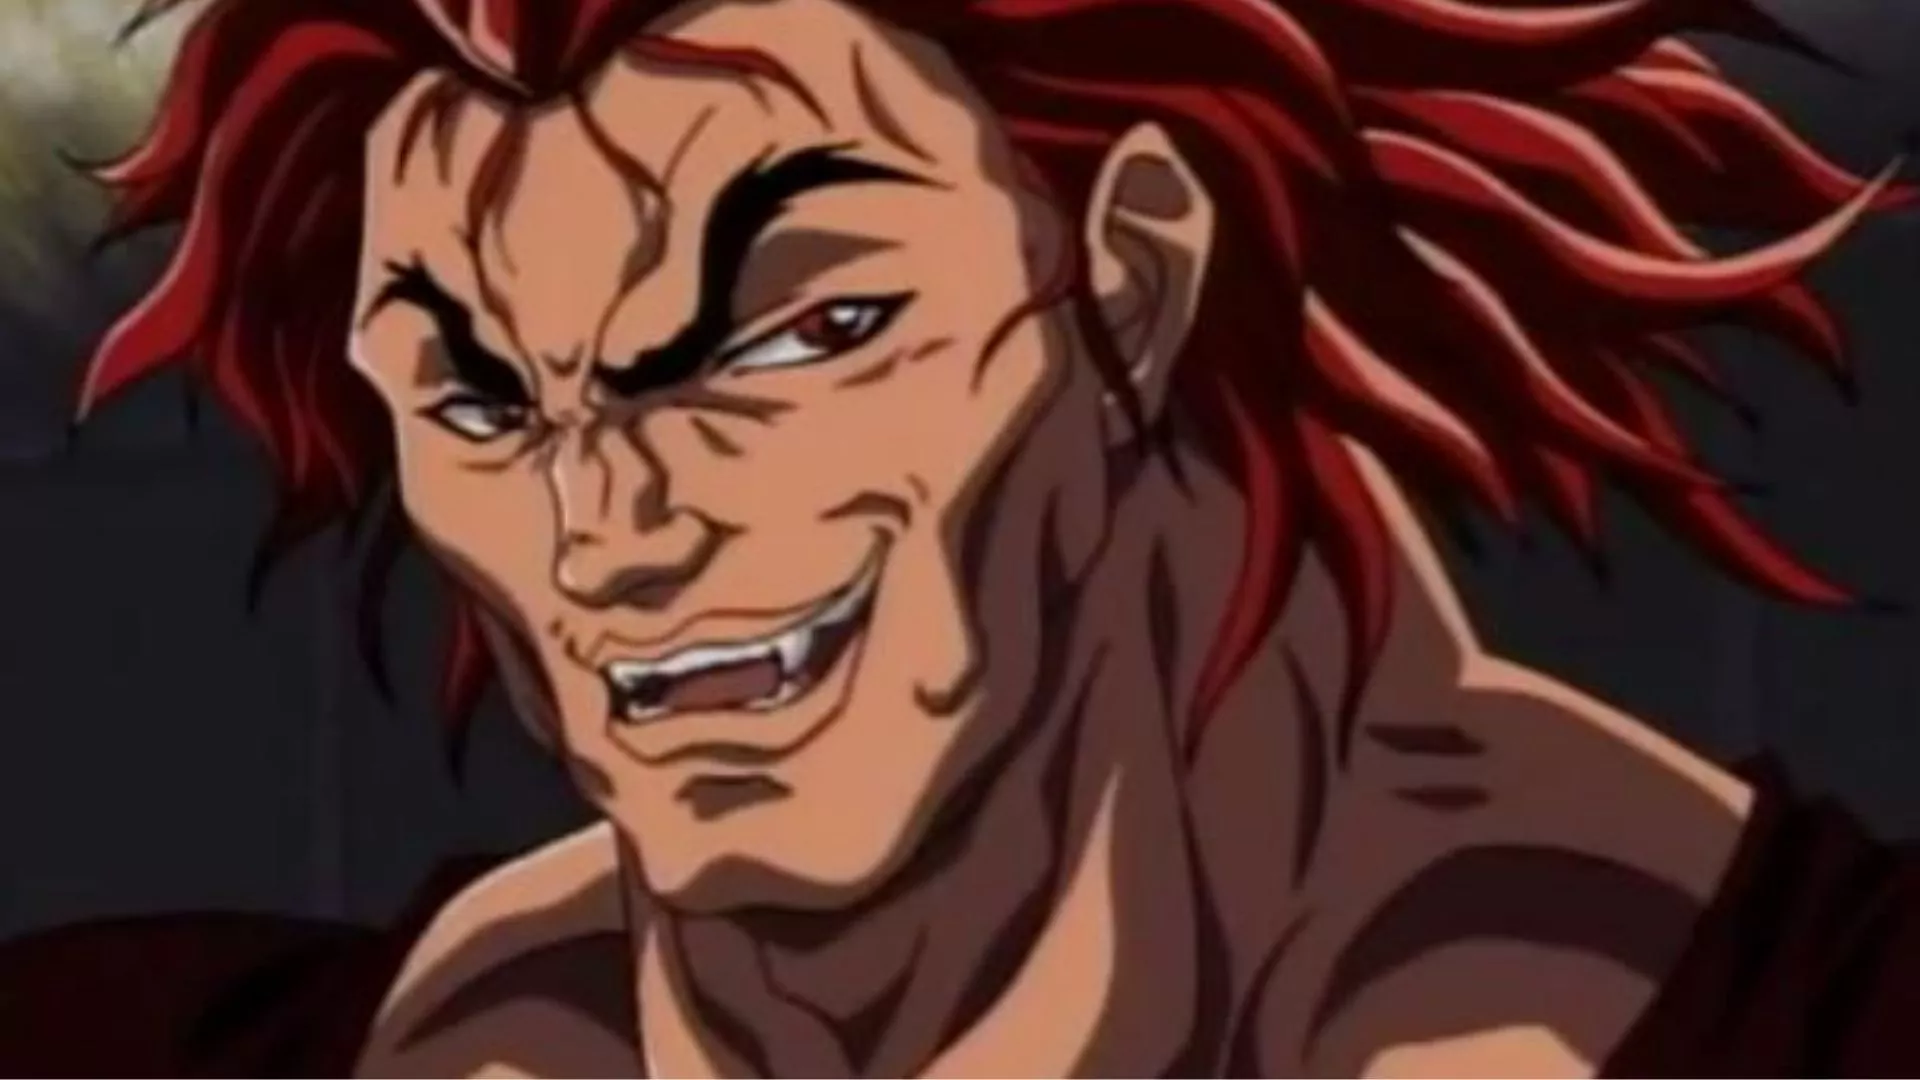 Baki the Grappler Parents Guide and Age Rating | (2001-07)